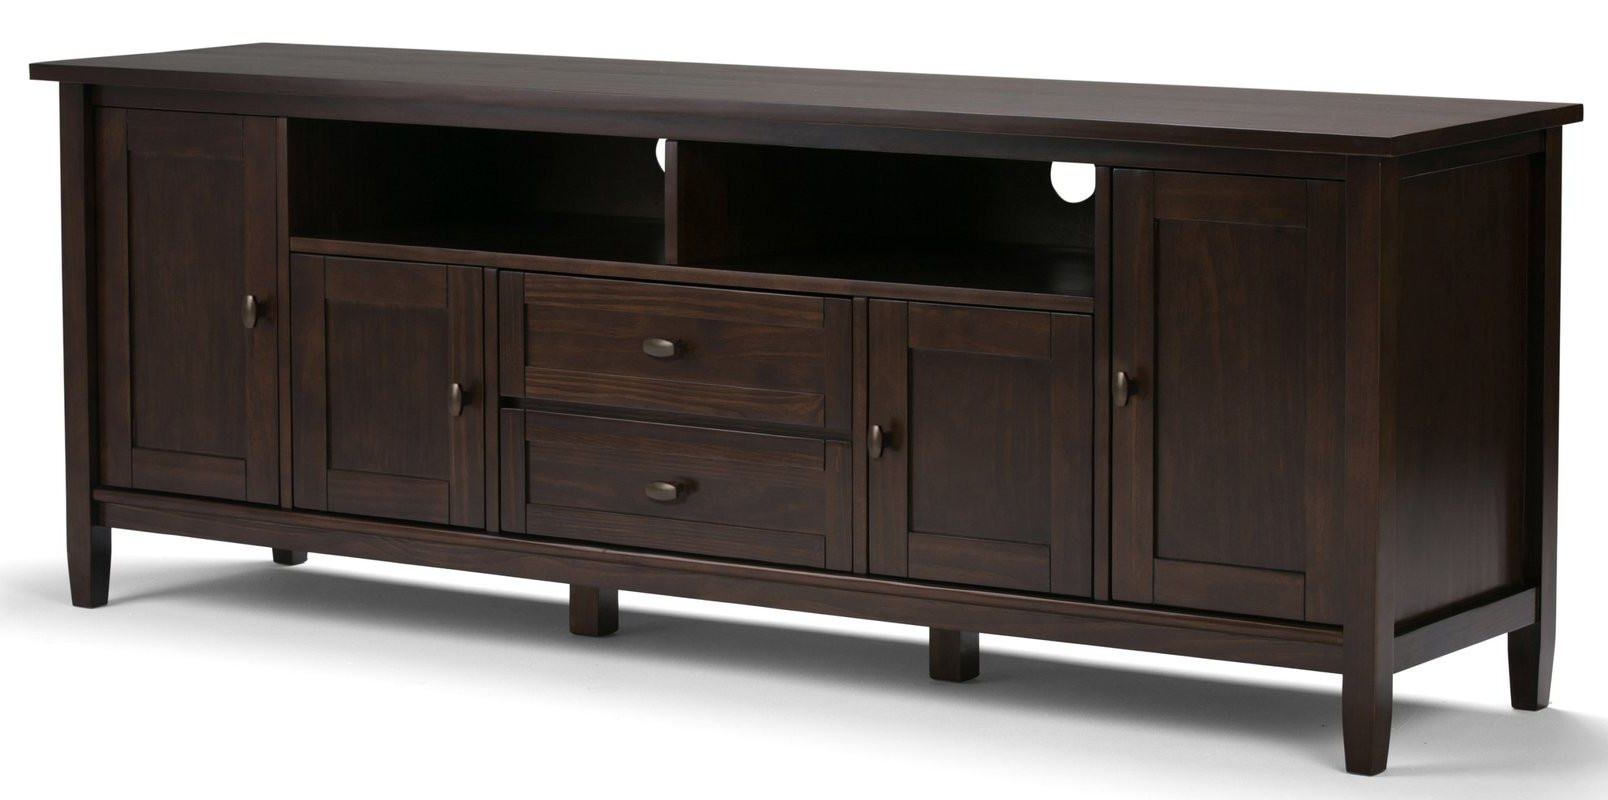 Ideal Tv Stands 72 Inch Home Ideas 72 Inch Tv Stand | Cakestandlady With Regard To Walton 72 Inch Tv Stands (View 6 of 20)